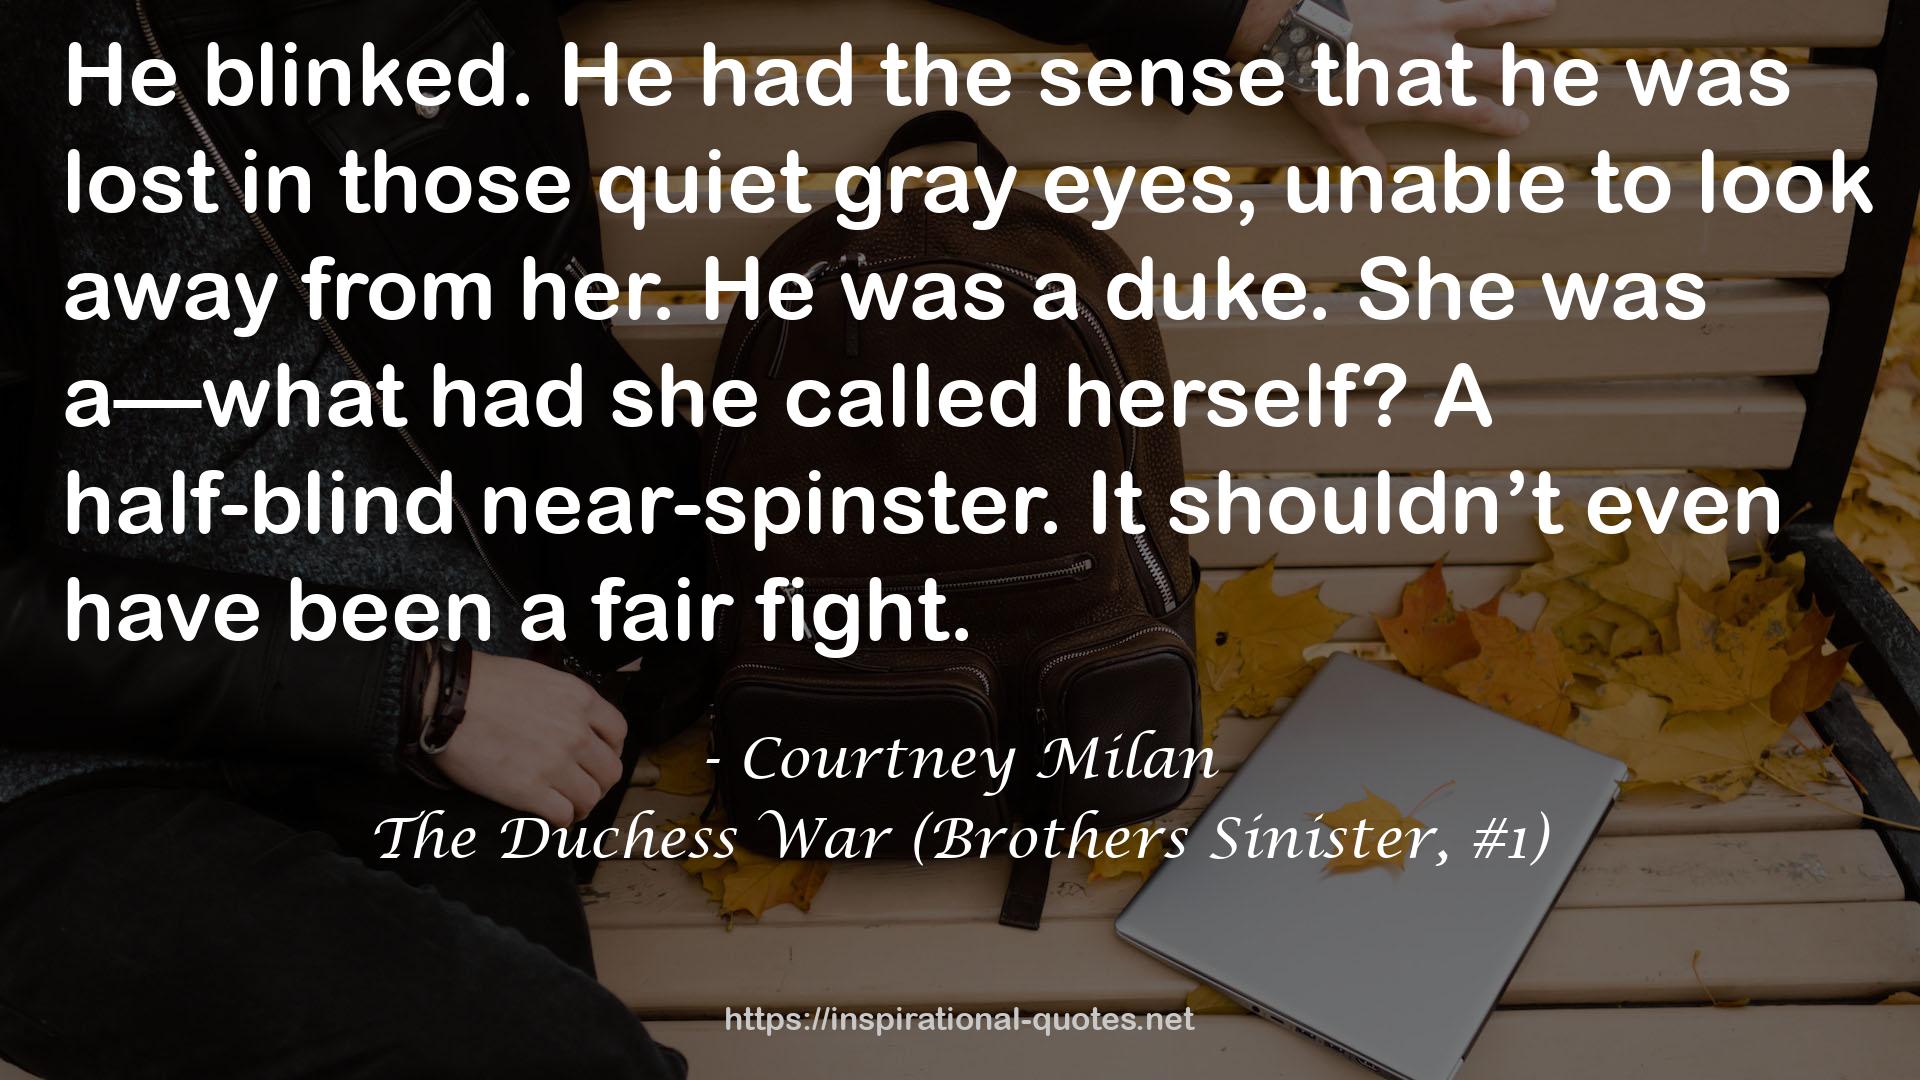 The Duchess War (Brothers Sinister, #1) QUOTES